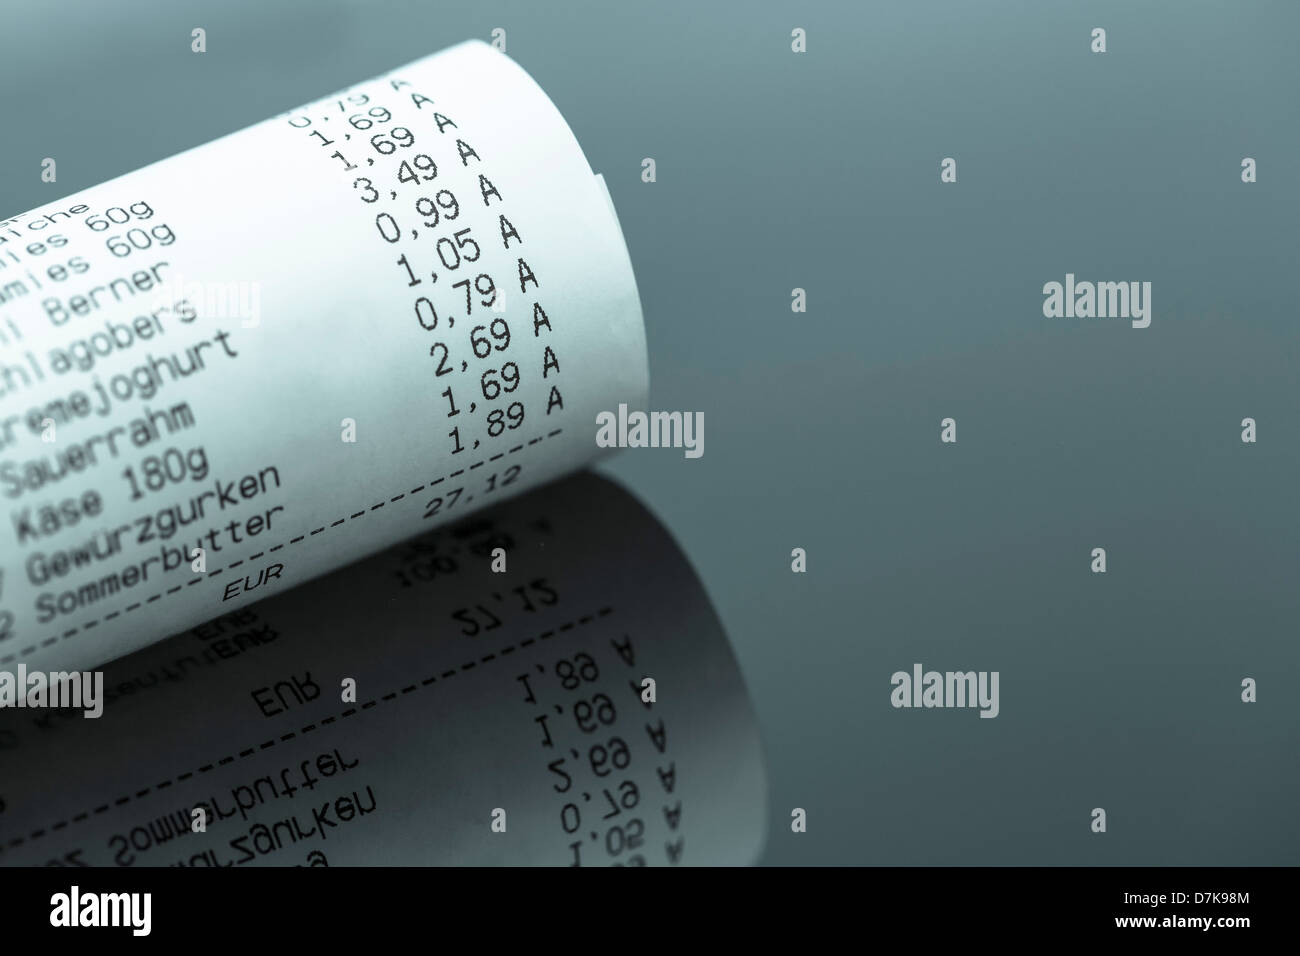 Shopping receipt for groceries in Euro, close up Stock Photo